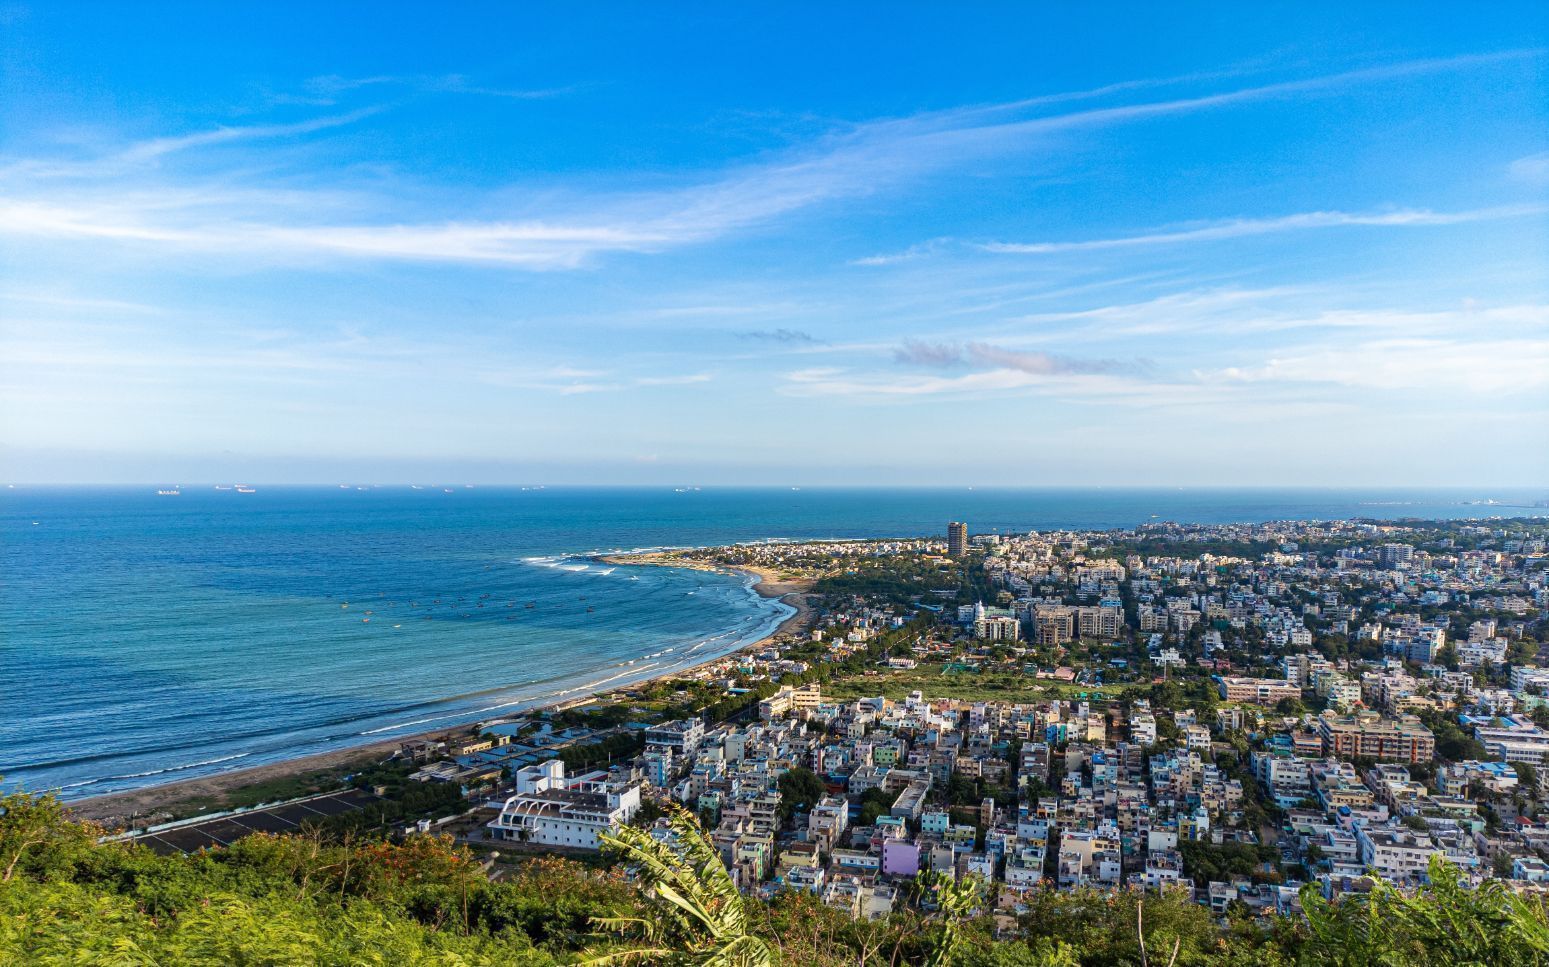 2173 Visakhapatnam Stock Photos HighRes Pictures and Images  Getty  Images